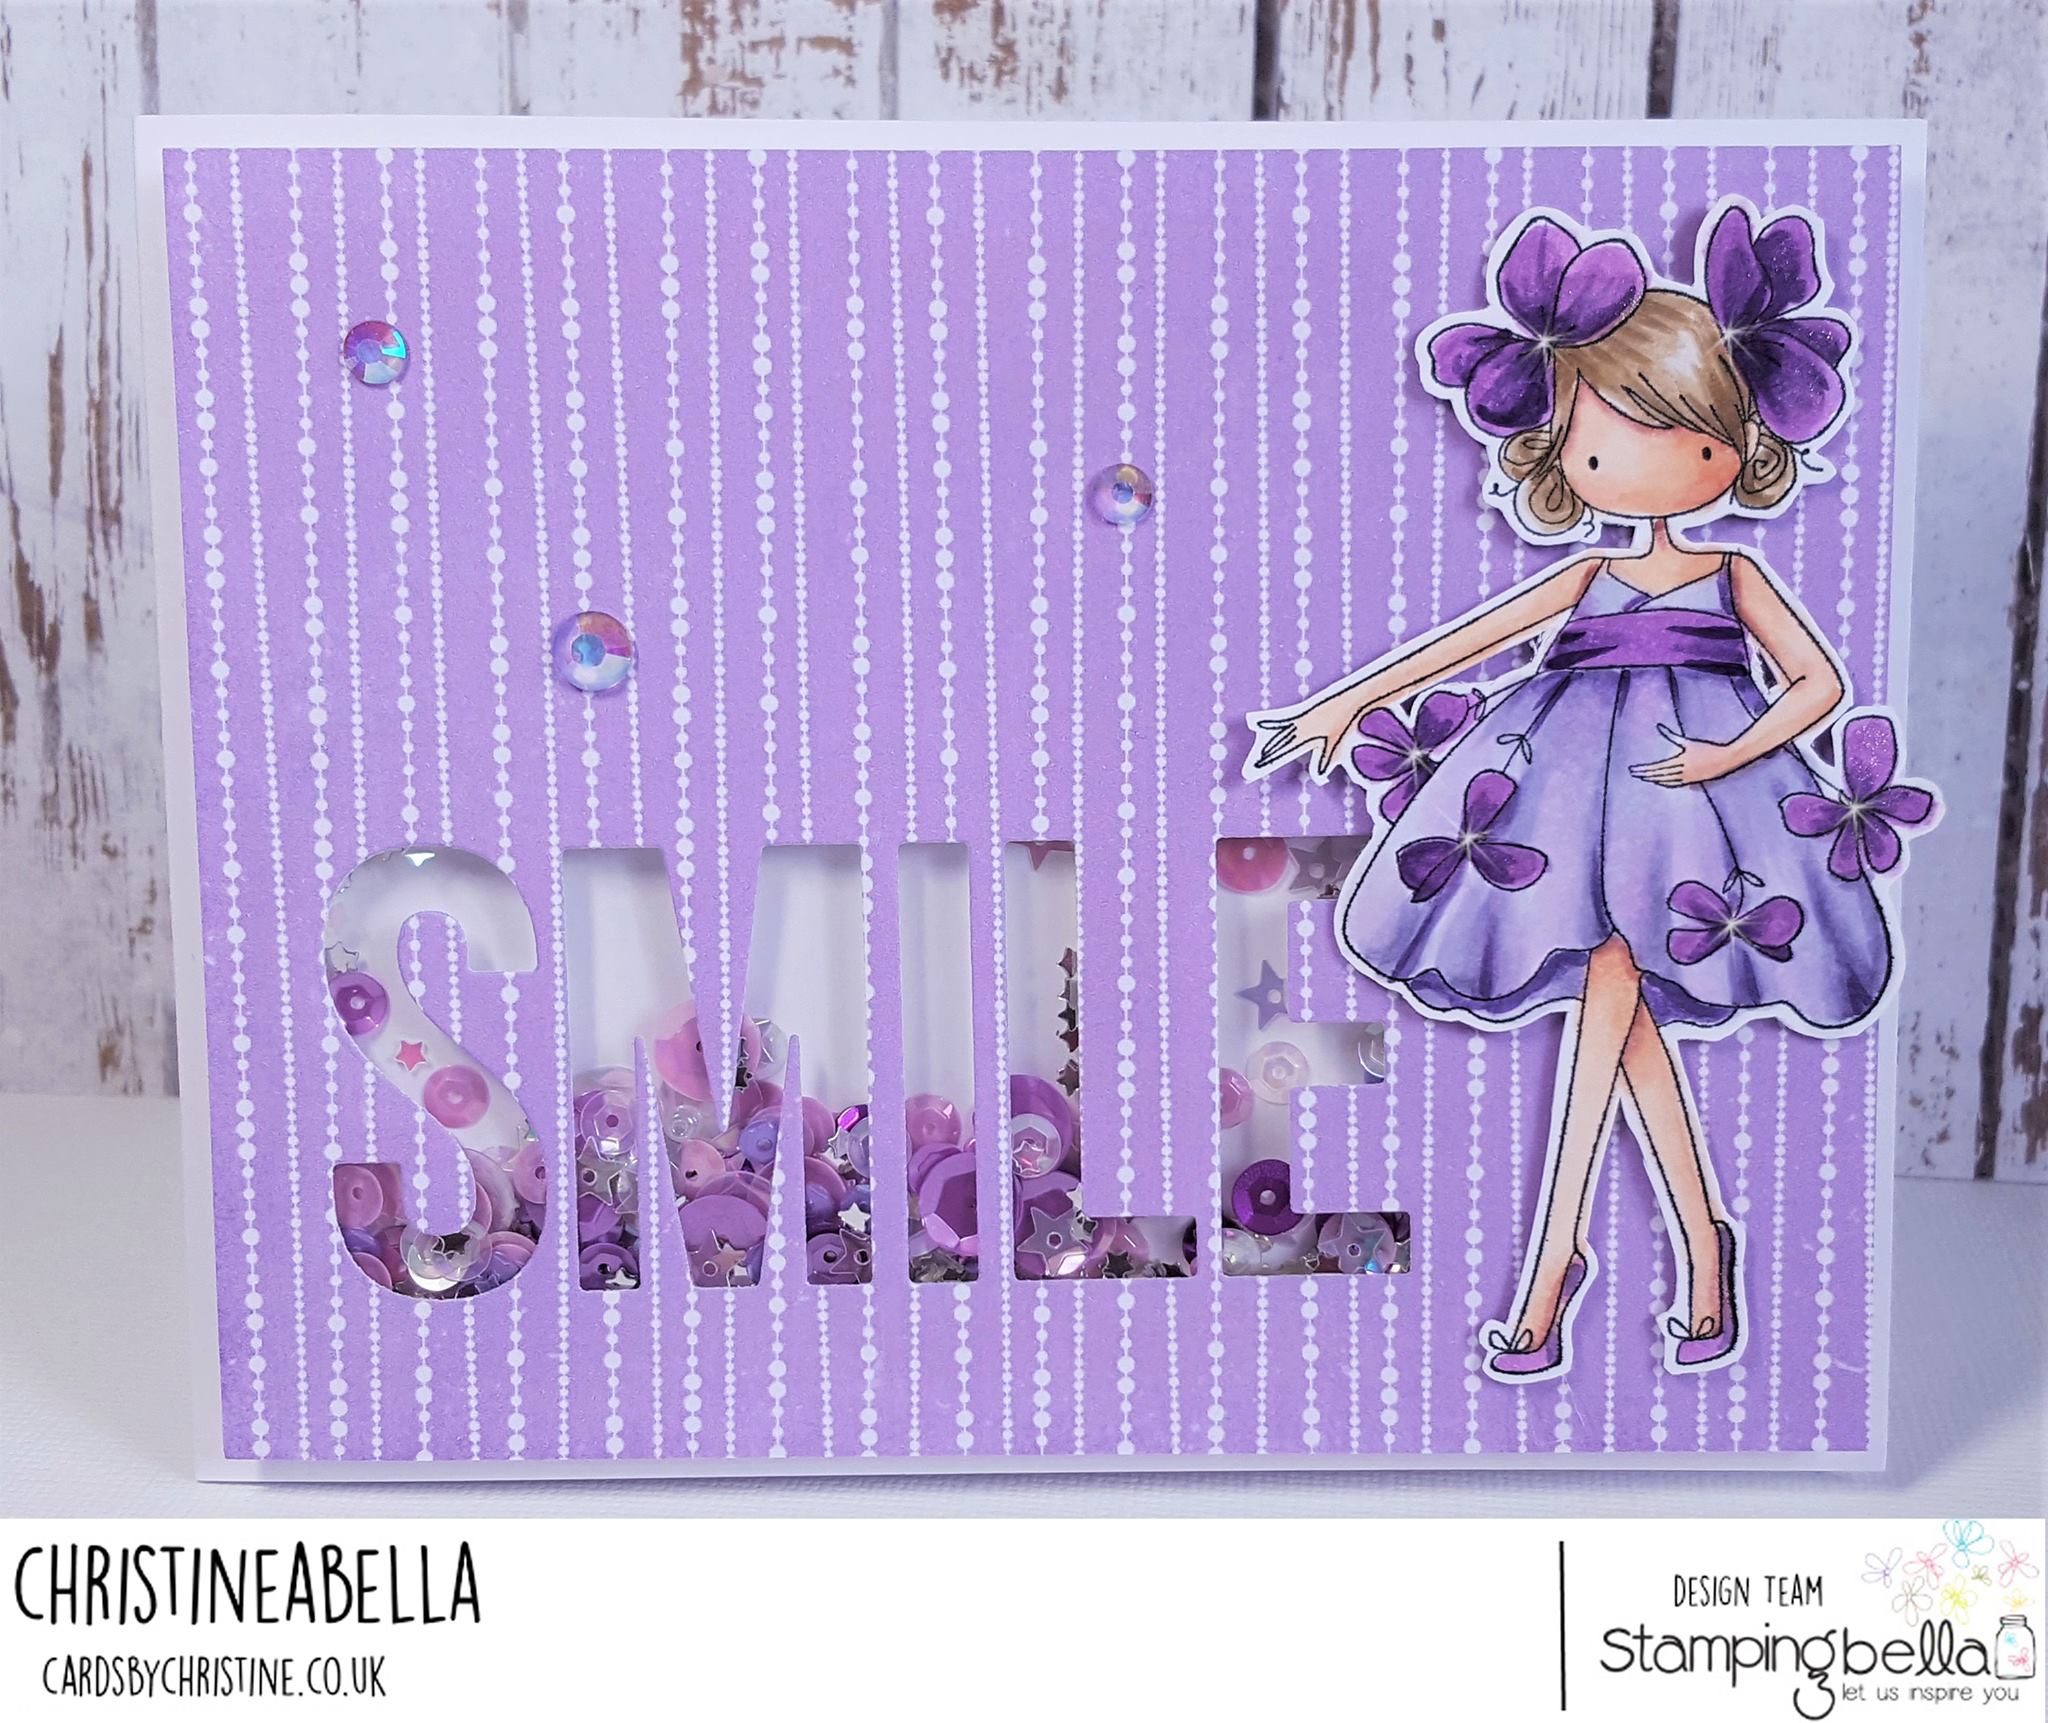 www.stampingbella.com: Rubber stamp usedL TINY TOWNIE GARDEN GIRL VIOLET , card made by Christine Levison